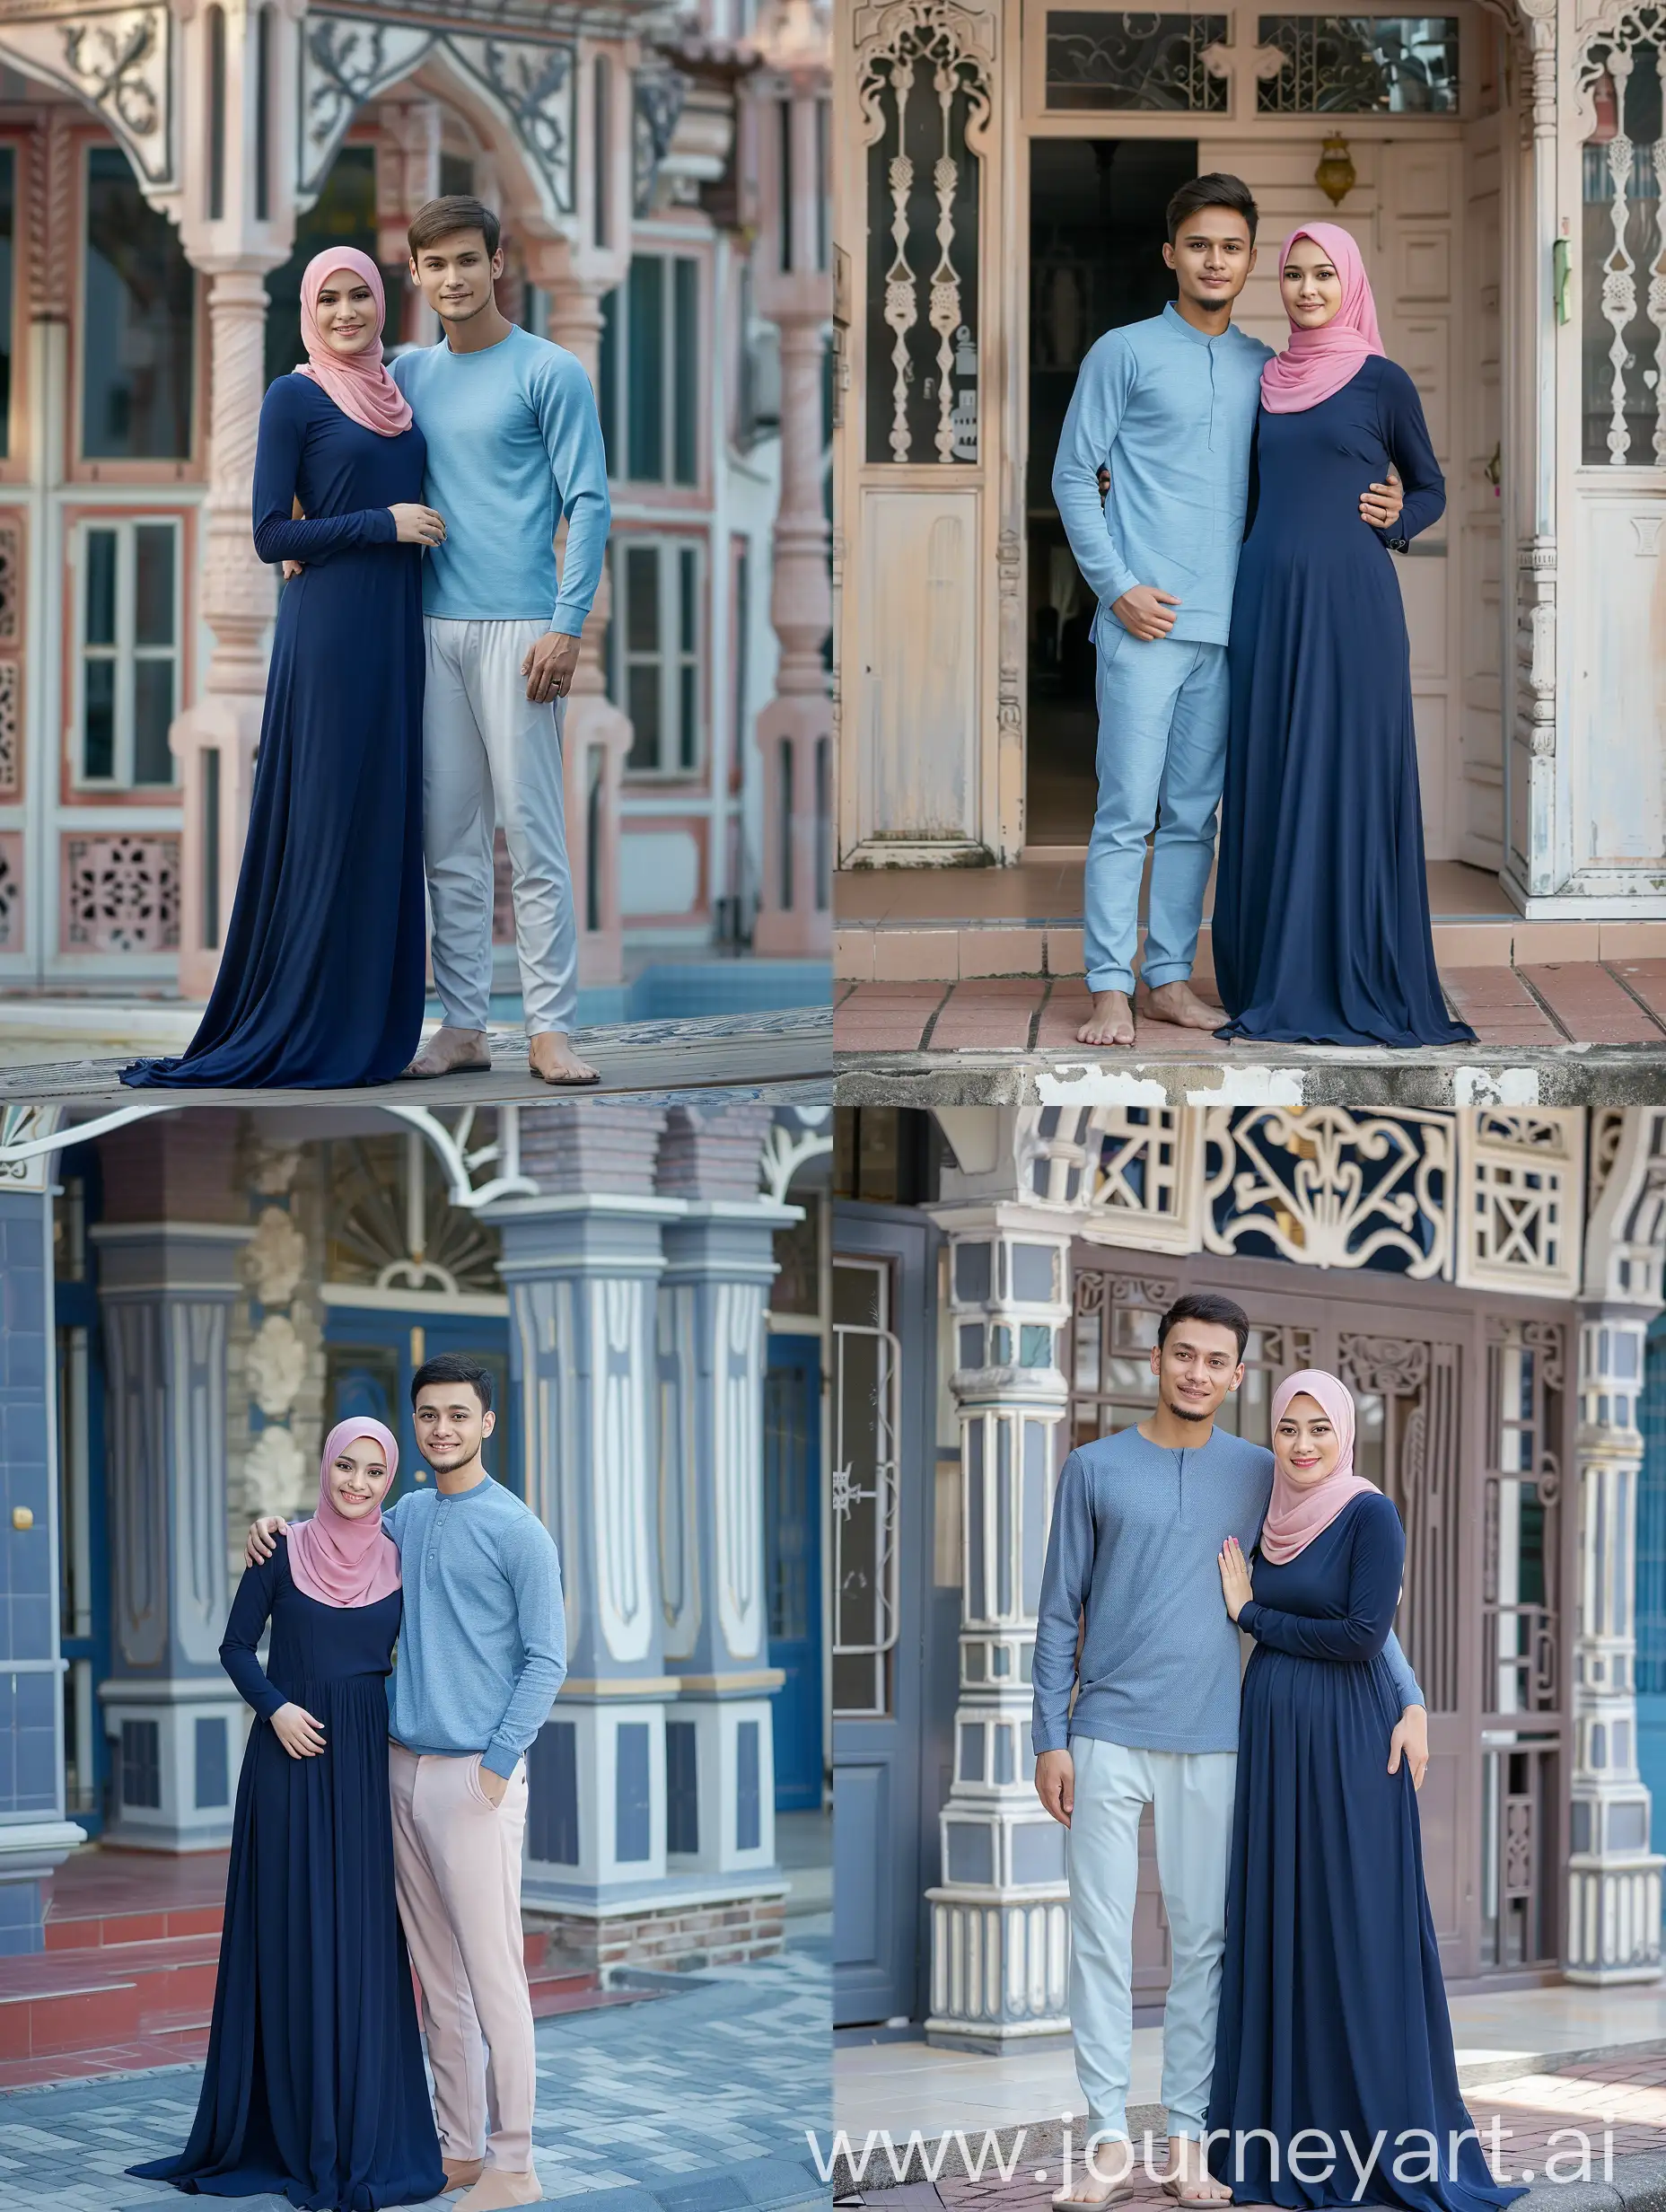 The image shows a young couple standing together outside what appears to be a residential building. The woman is wearing a long navy blue dress and a pink hijab, while the man is wearing a light blue long-sleeved shirt and pants. They have their arms around each other in a warm, friendly manner, suggesting they are a couple or family members posing for a photo together. The background depicts a somewhat aged building with decorative architectural details.